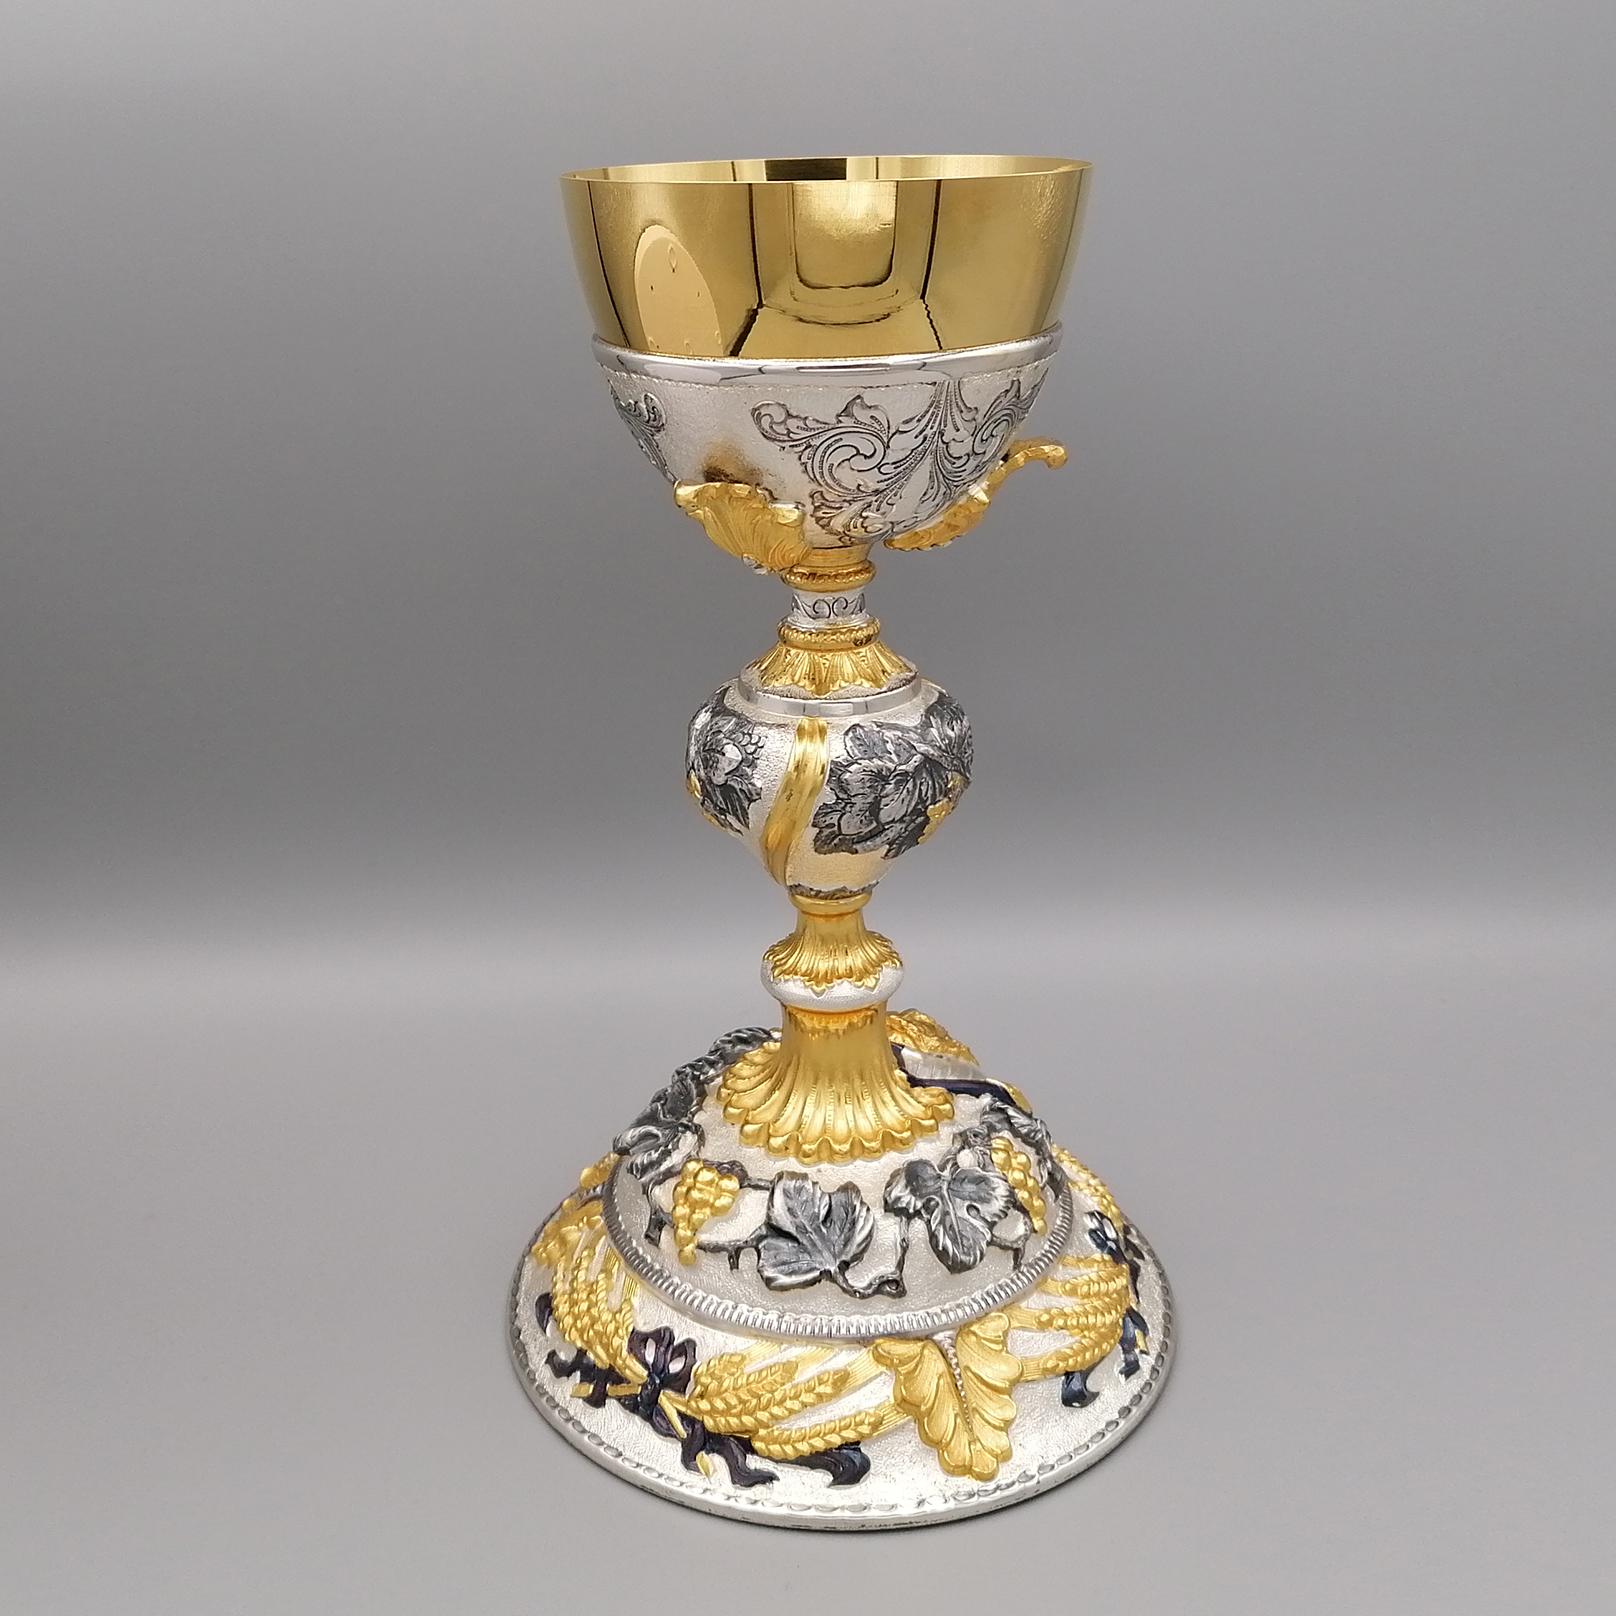 Large Liturgical Chalice in sterling silver.
The base is finely embossed with the face of Christ, grapes, vine leaves and ears.
The workmanship is highlighted by the 24 Kt golden finish, burnished and knurled.
The stem is also embossed and chiseled